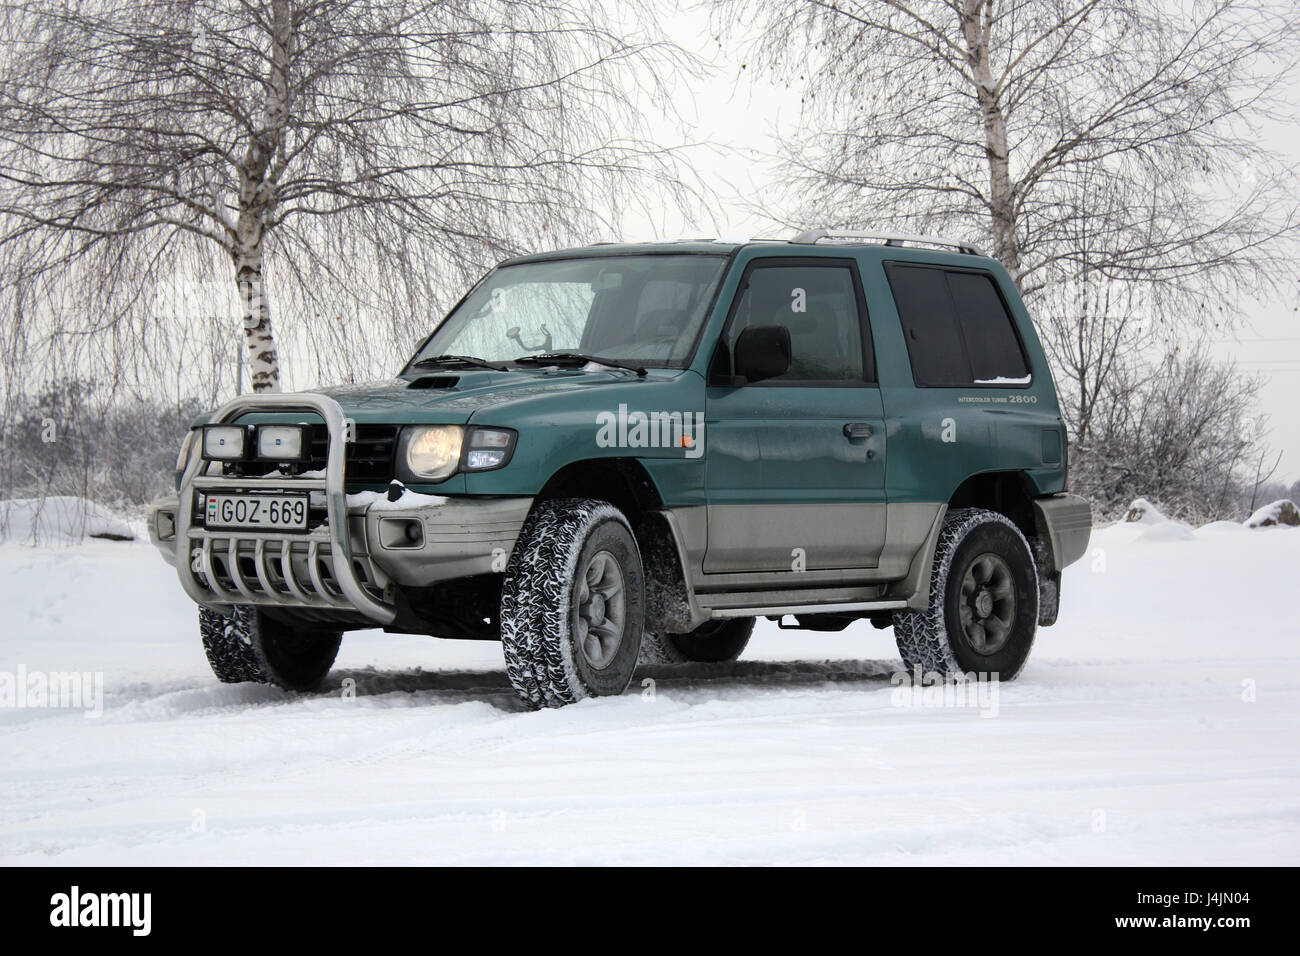 BUDAPEST, HUNGARY - DECEMBER 19, 2010: Dirty Mitsubishi Pajero (1998) standing in the snow on December 19, 2010 in Budapest, Hungary. Stock Photo